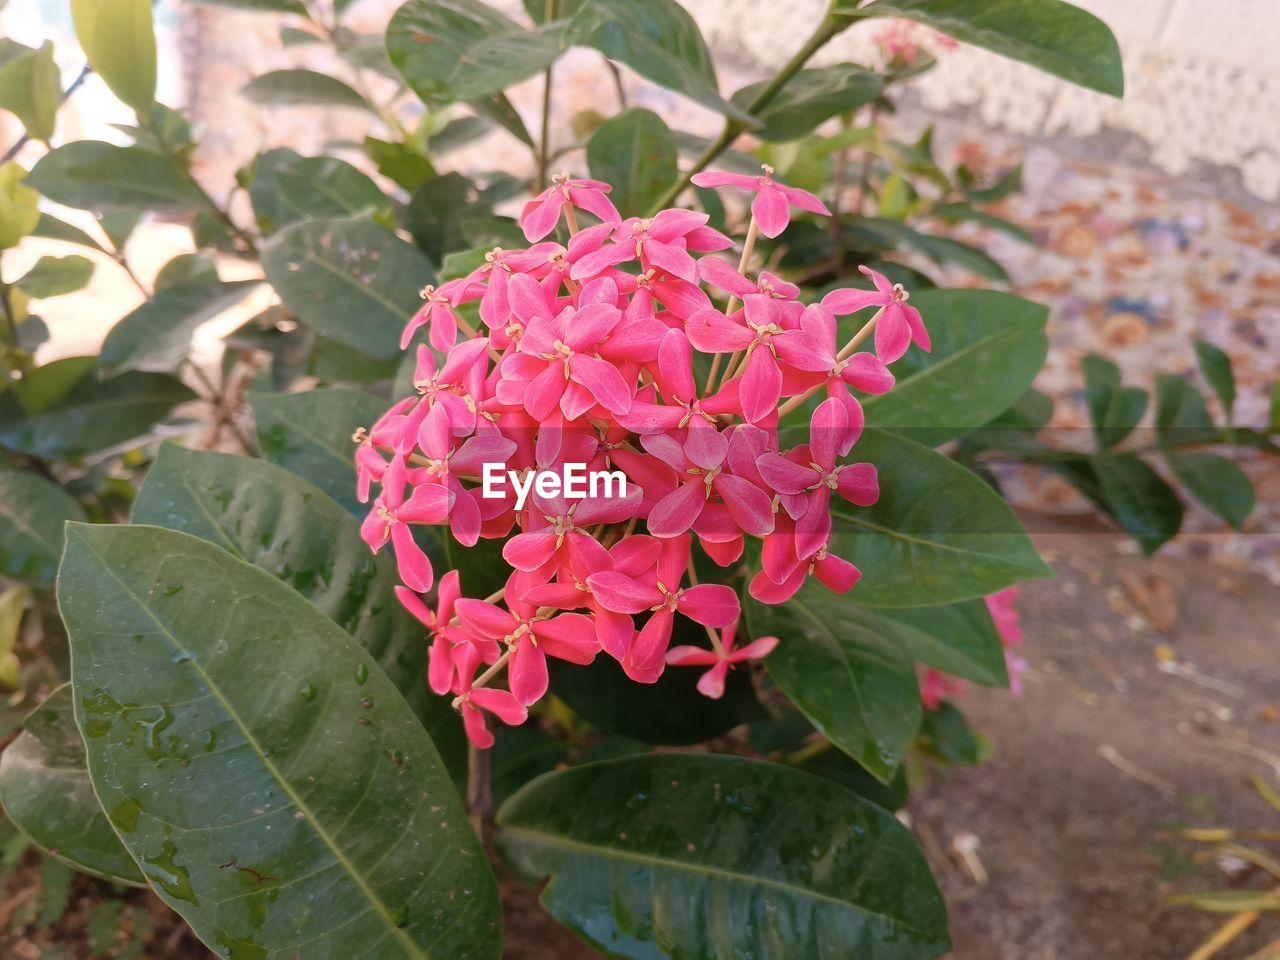 plant, flowering plant, flower, plant part, leaf, beauty in nature, growth, freshness, nature, pink, fragility, close-up, petal, shrub, flower head, inflorescence, day, no people, outdoors, focus on foreground